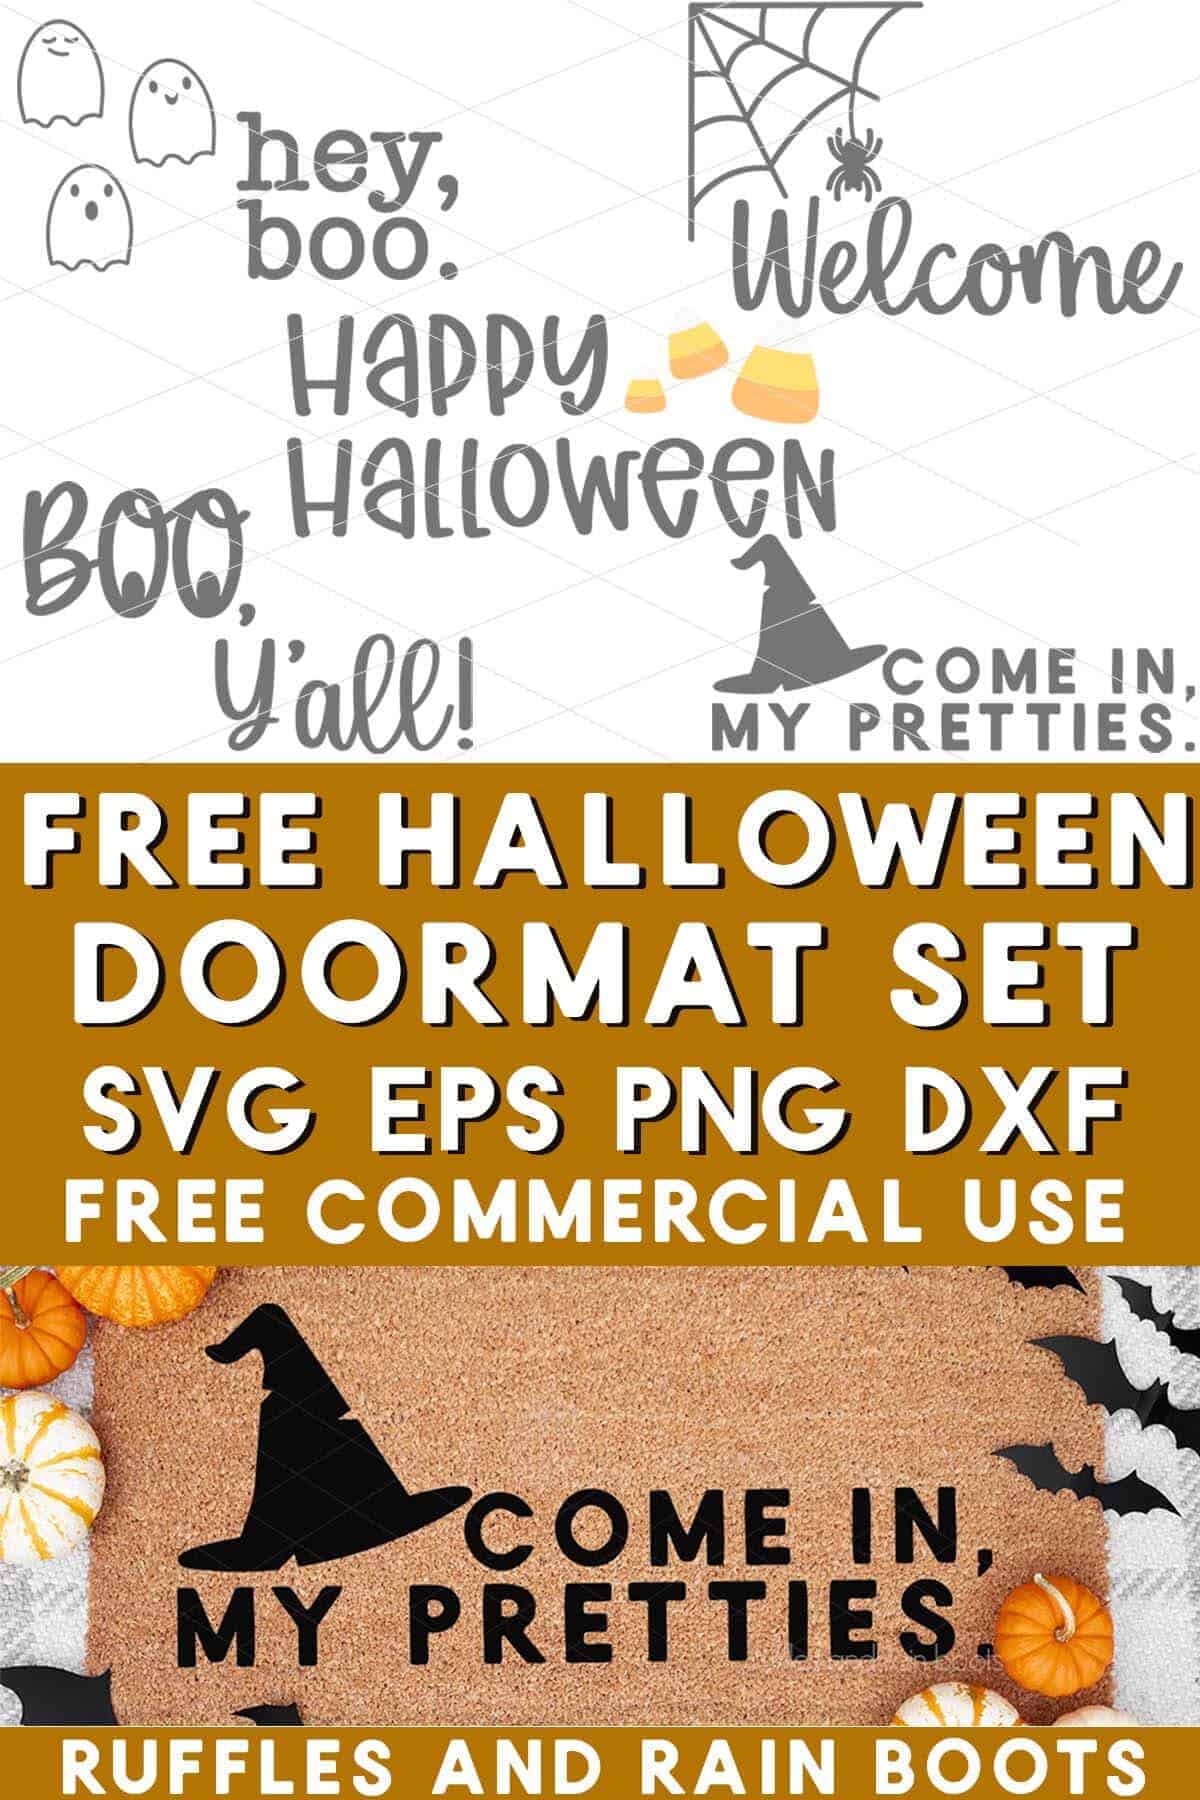 Stacked vertical image showing a doormat and text which reads free Halloween doormat SVG with commercial use.